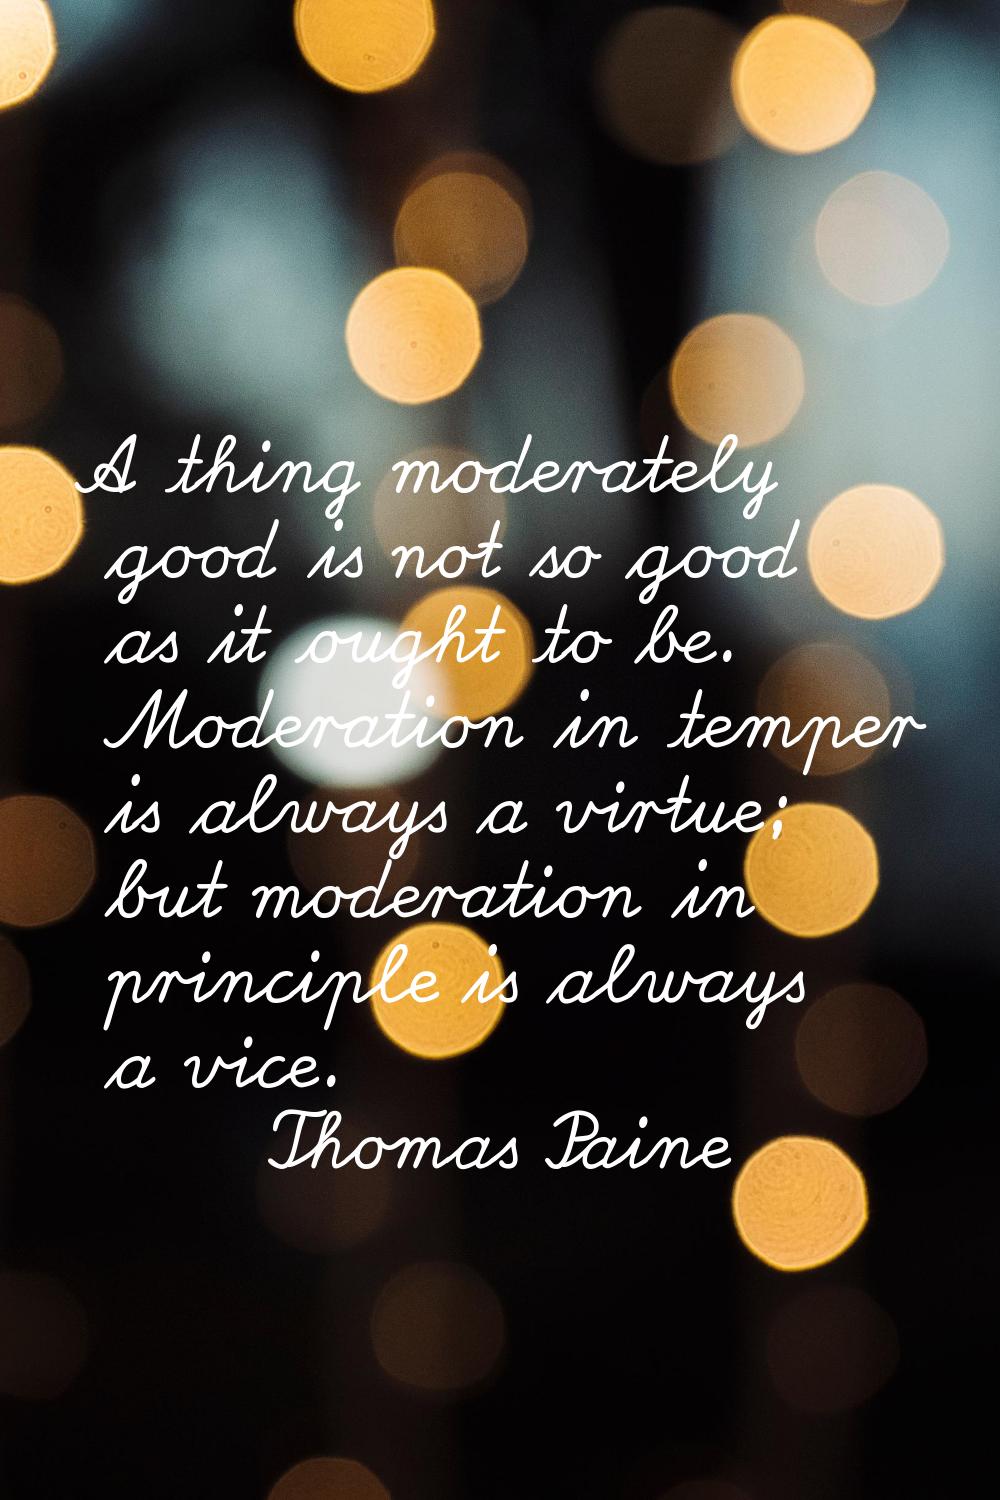 A thing moderately good is not so good as it ought to be. Moderation in temper is always a virtue; 